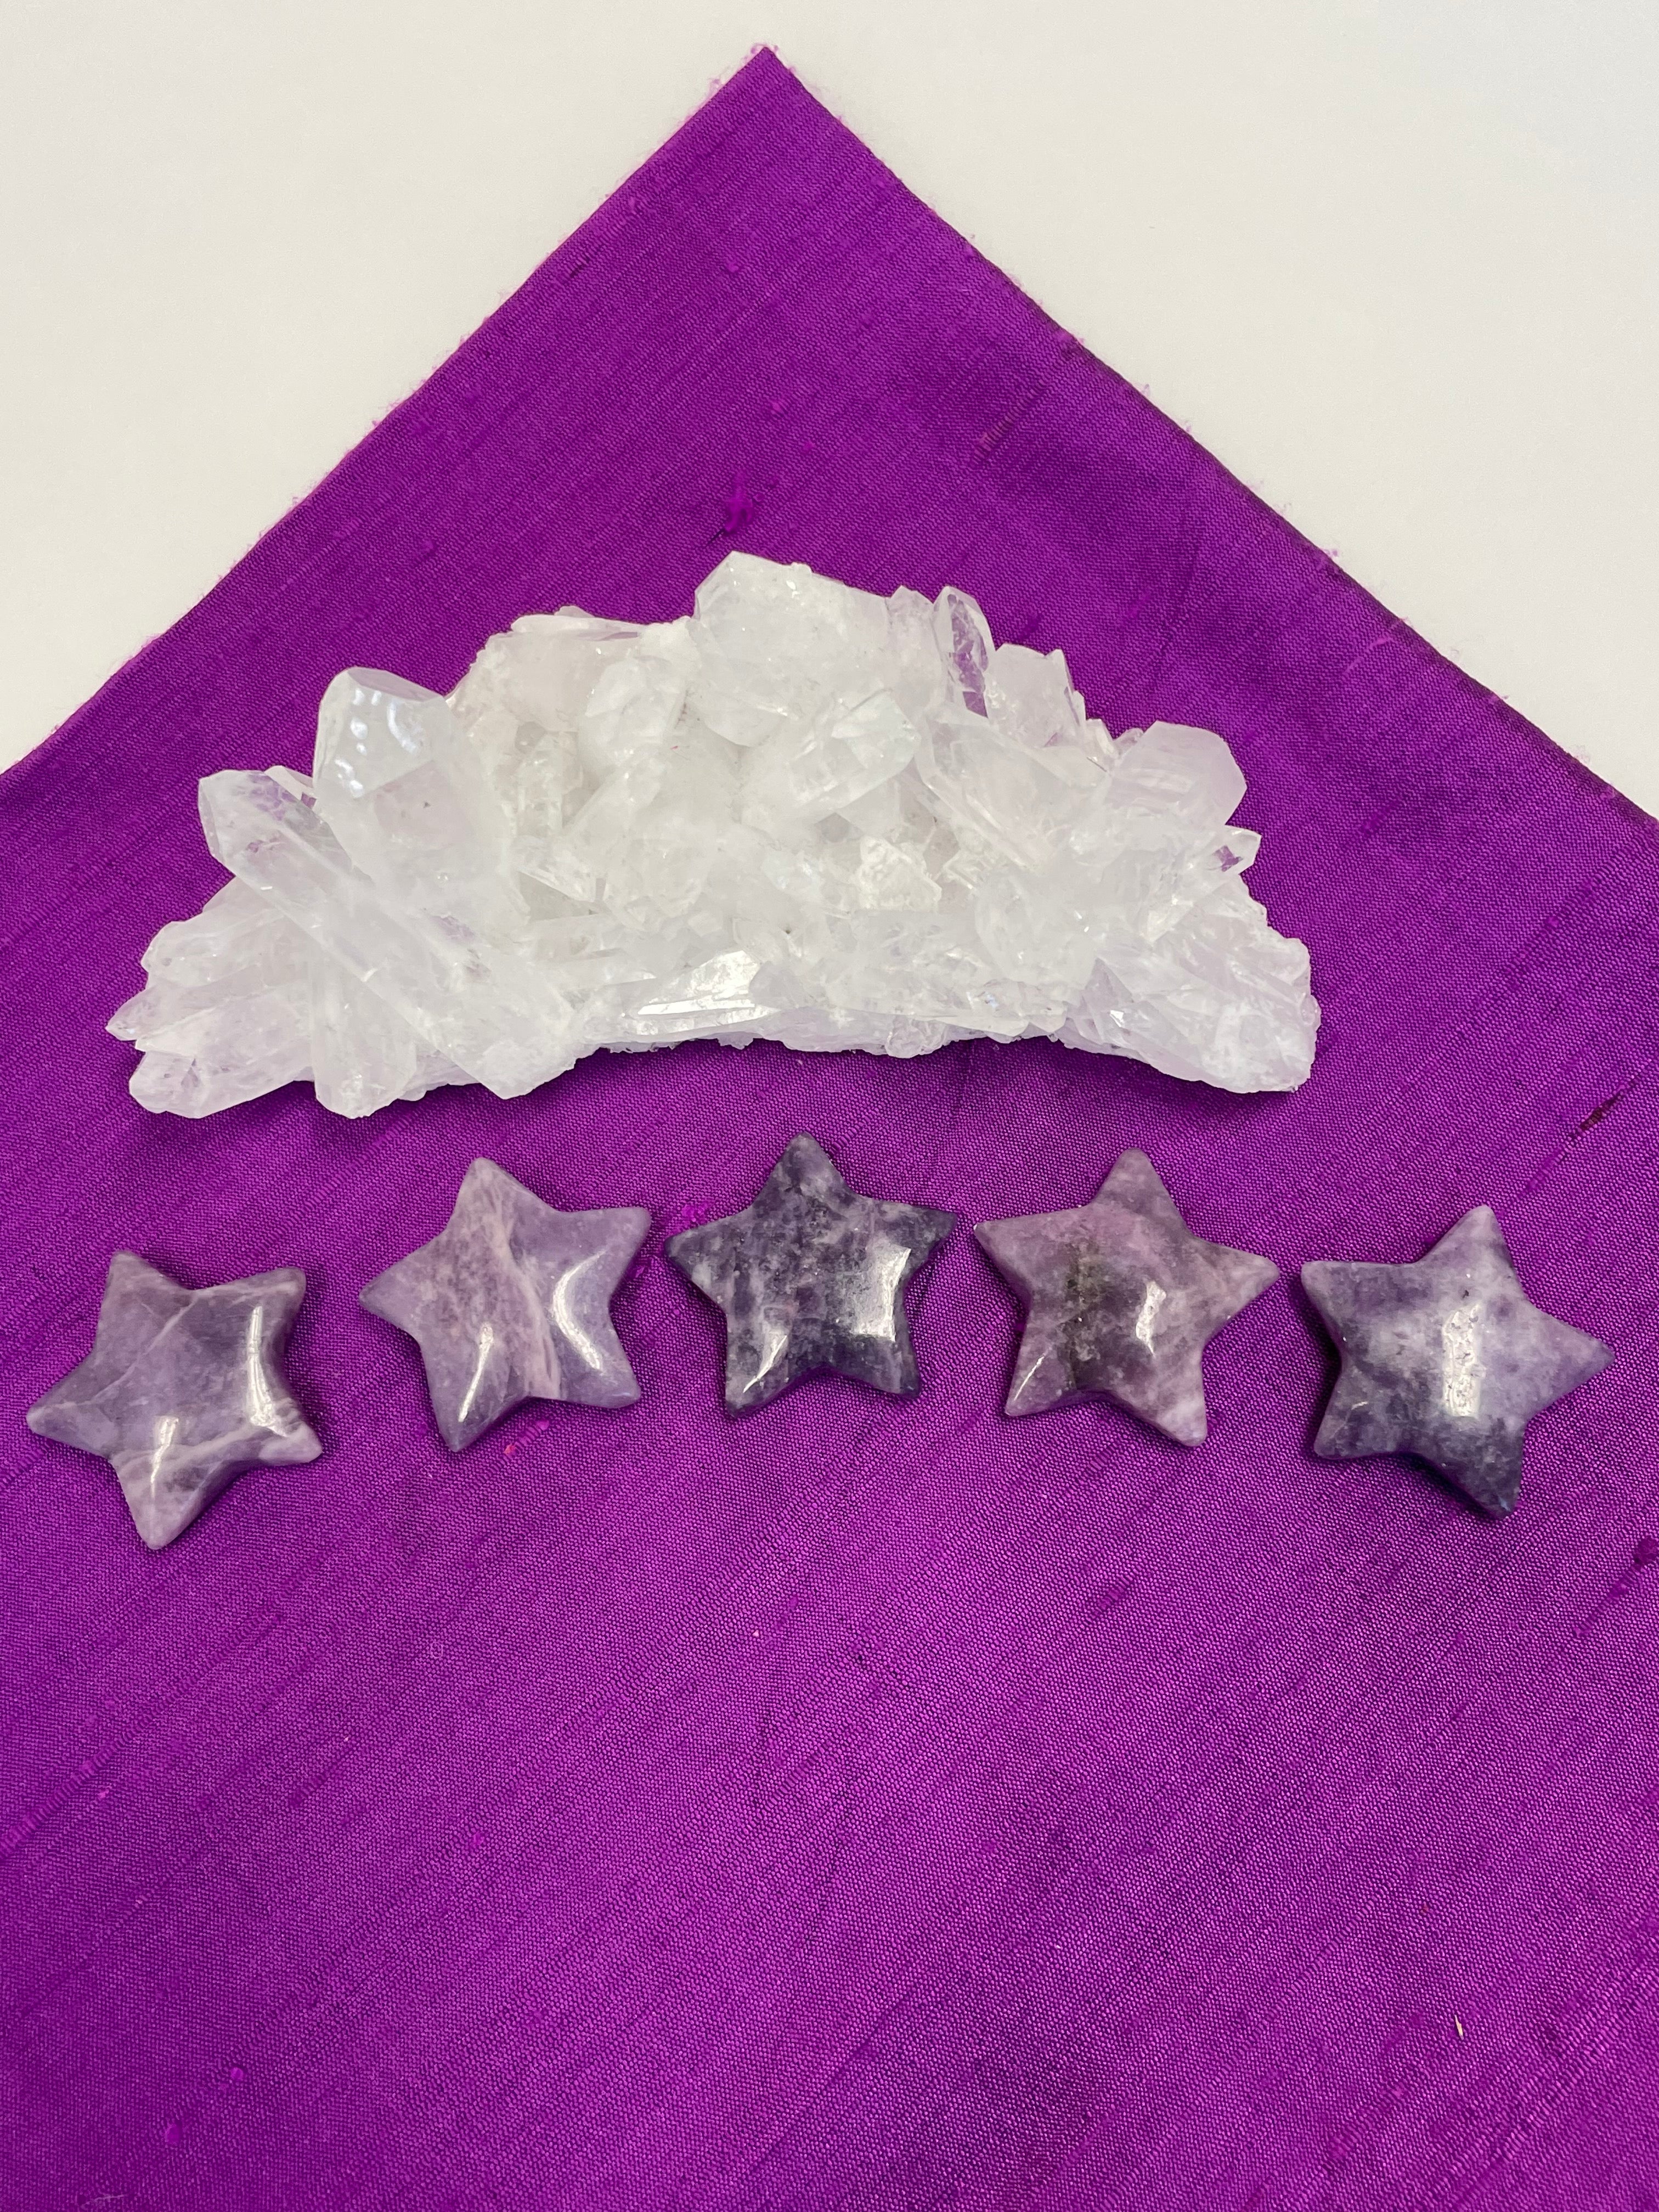 View of several lepidolite stars. This lovely little Lepidolite star can be used for meditation, healing, for your altar, on your computer to clear EMRs, or as décor for any room in your home or office. Easy to slip right into your pocket so you have the energy of lepidolite everywhere you go. Approximately 1¼". Cost is $6 for one star. 